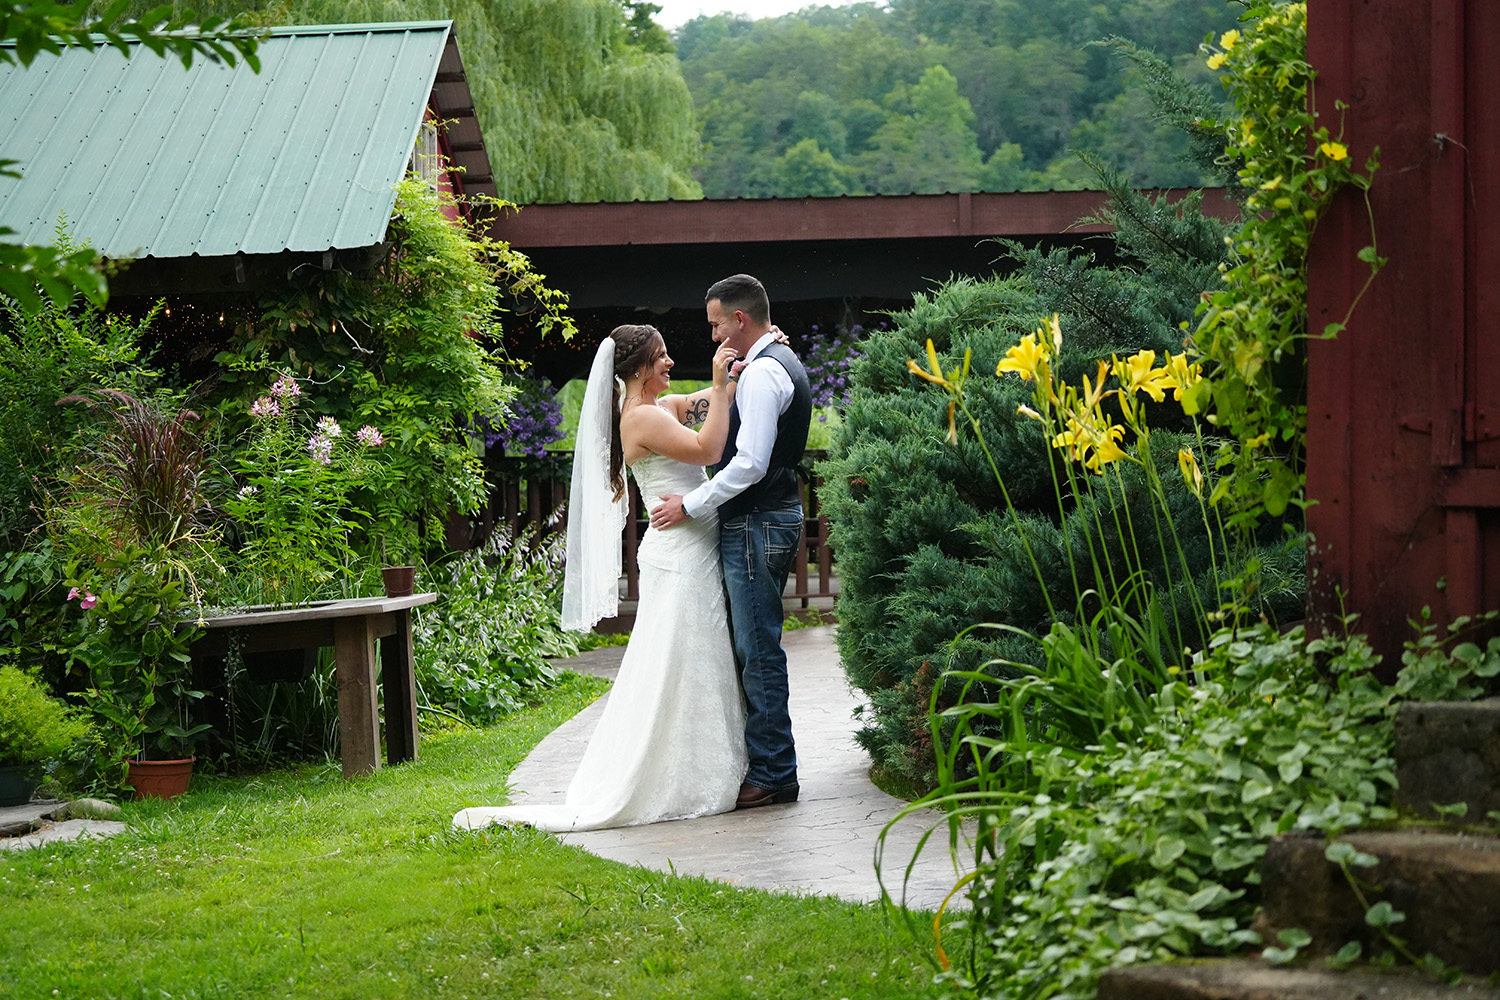 Bride touching her groom's lips with her finger in a country garden at Honeysuckle Hills in Pigeon Forge